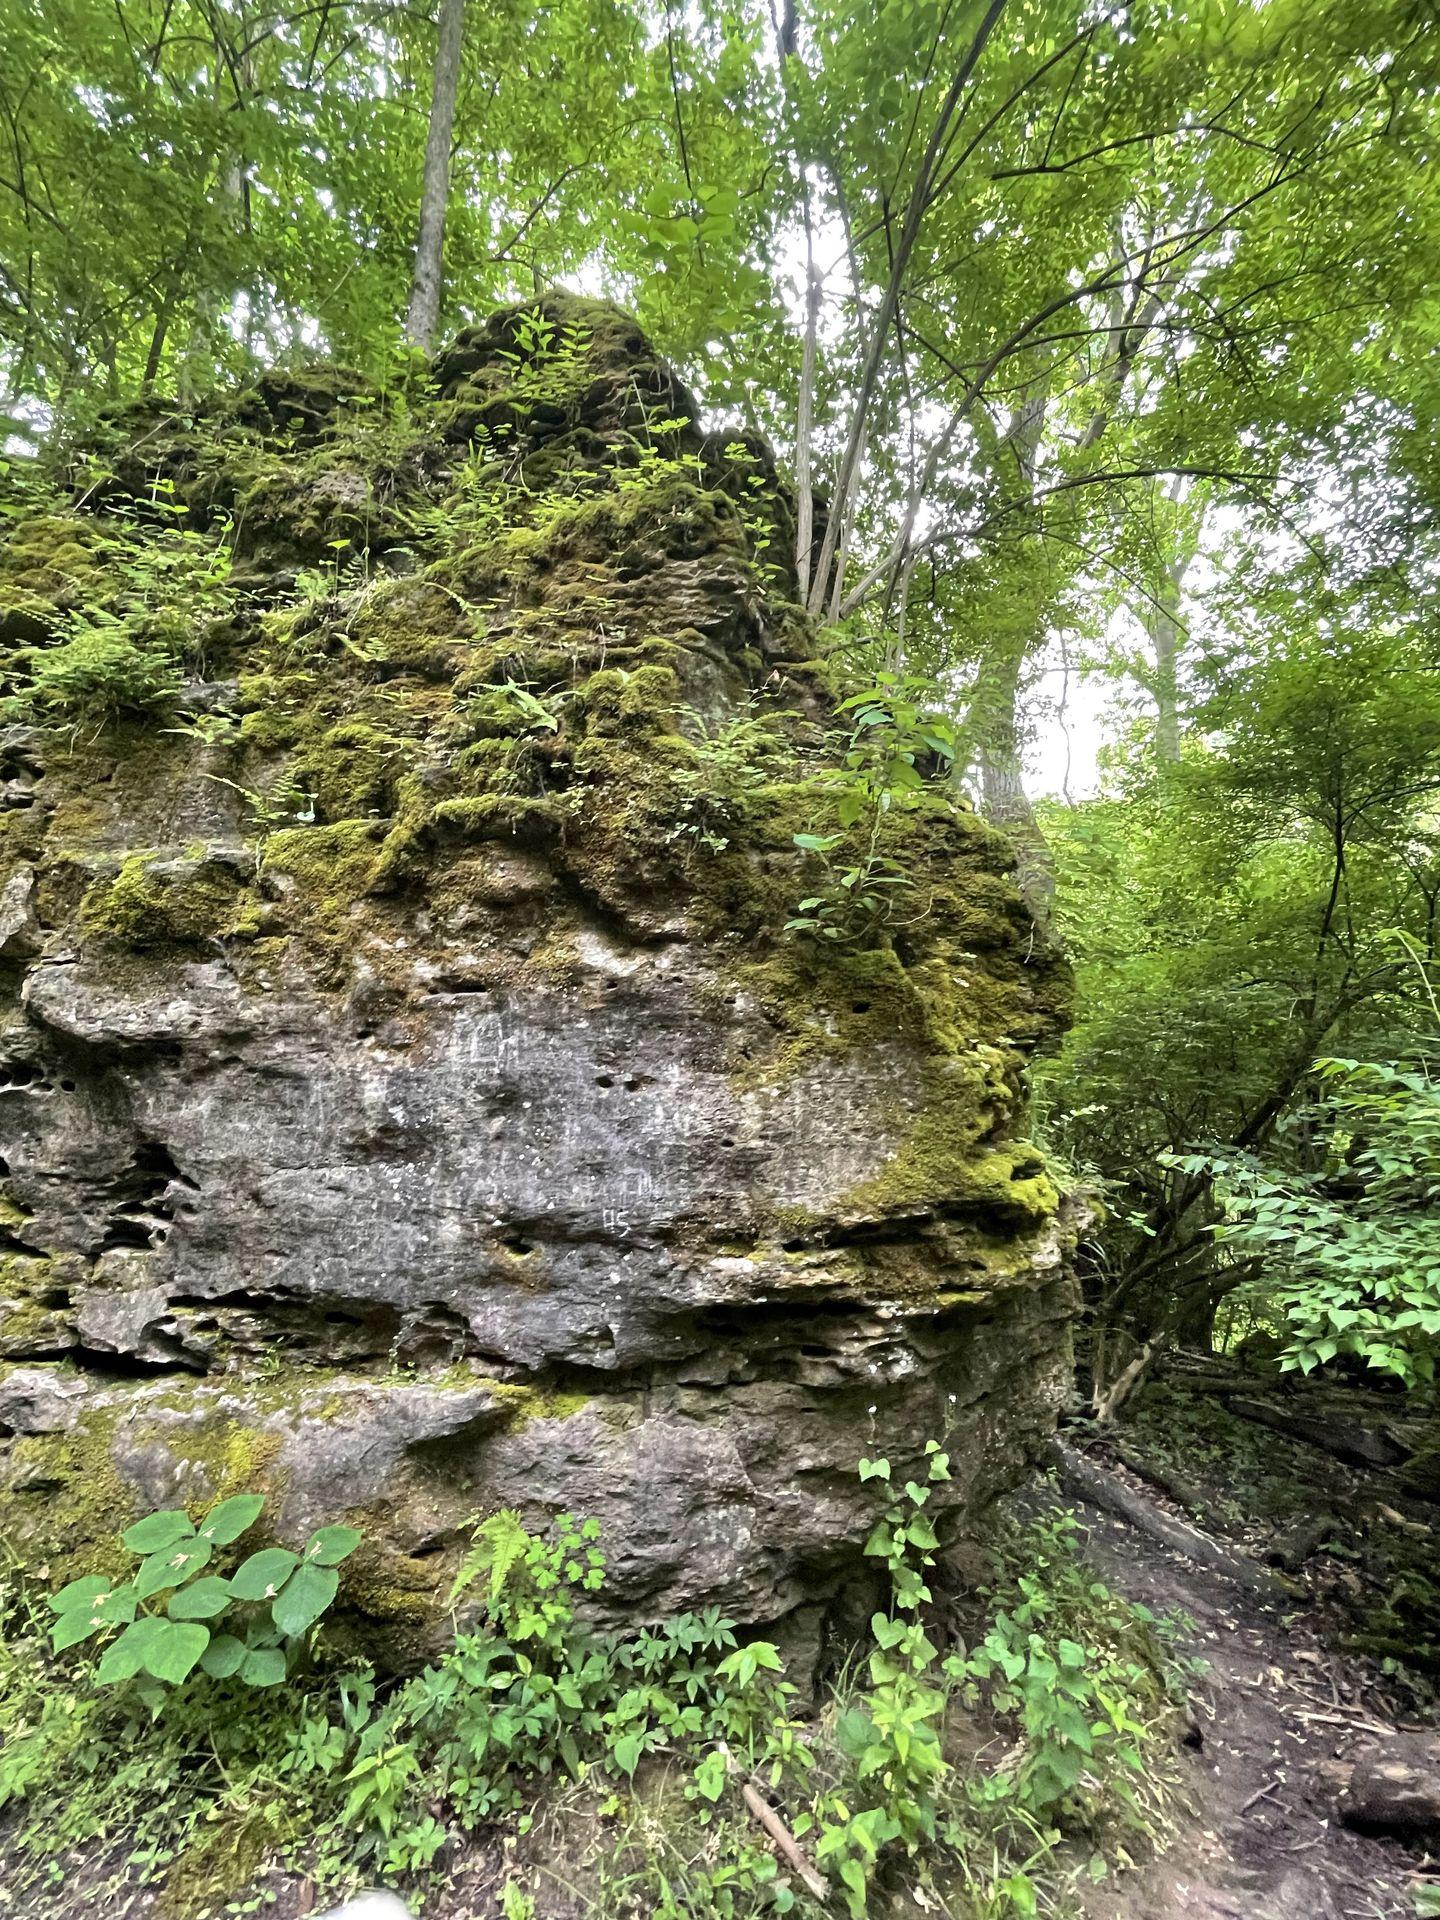 Large rocks covered in greenery on a cliff in John Bryan State Park